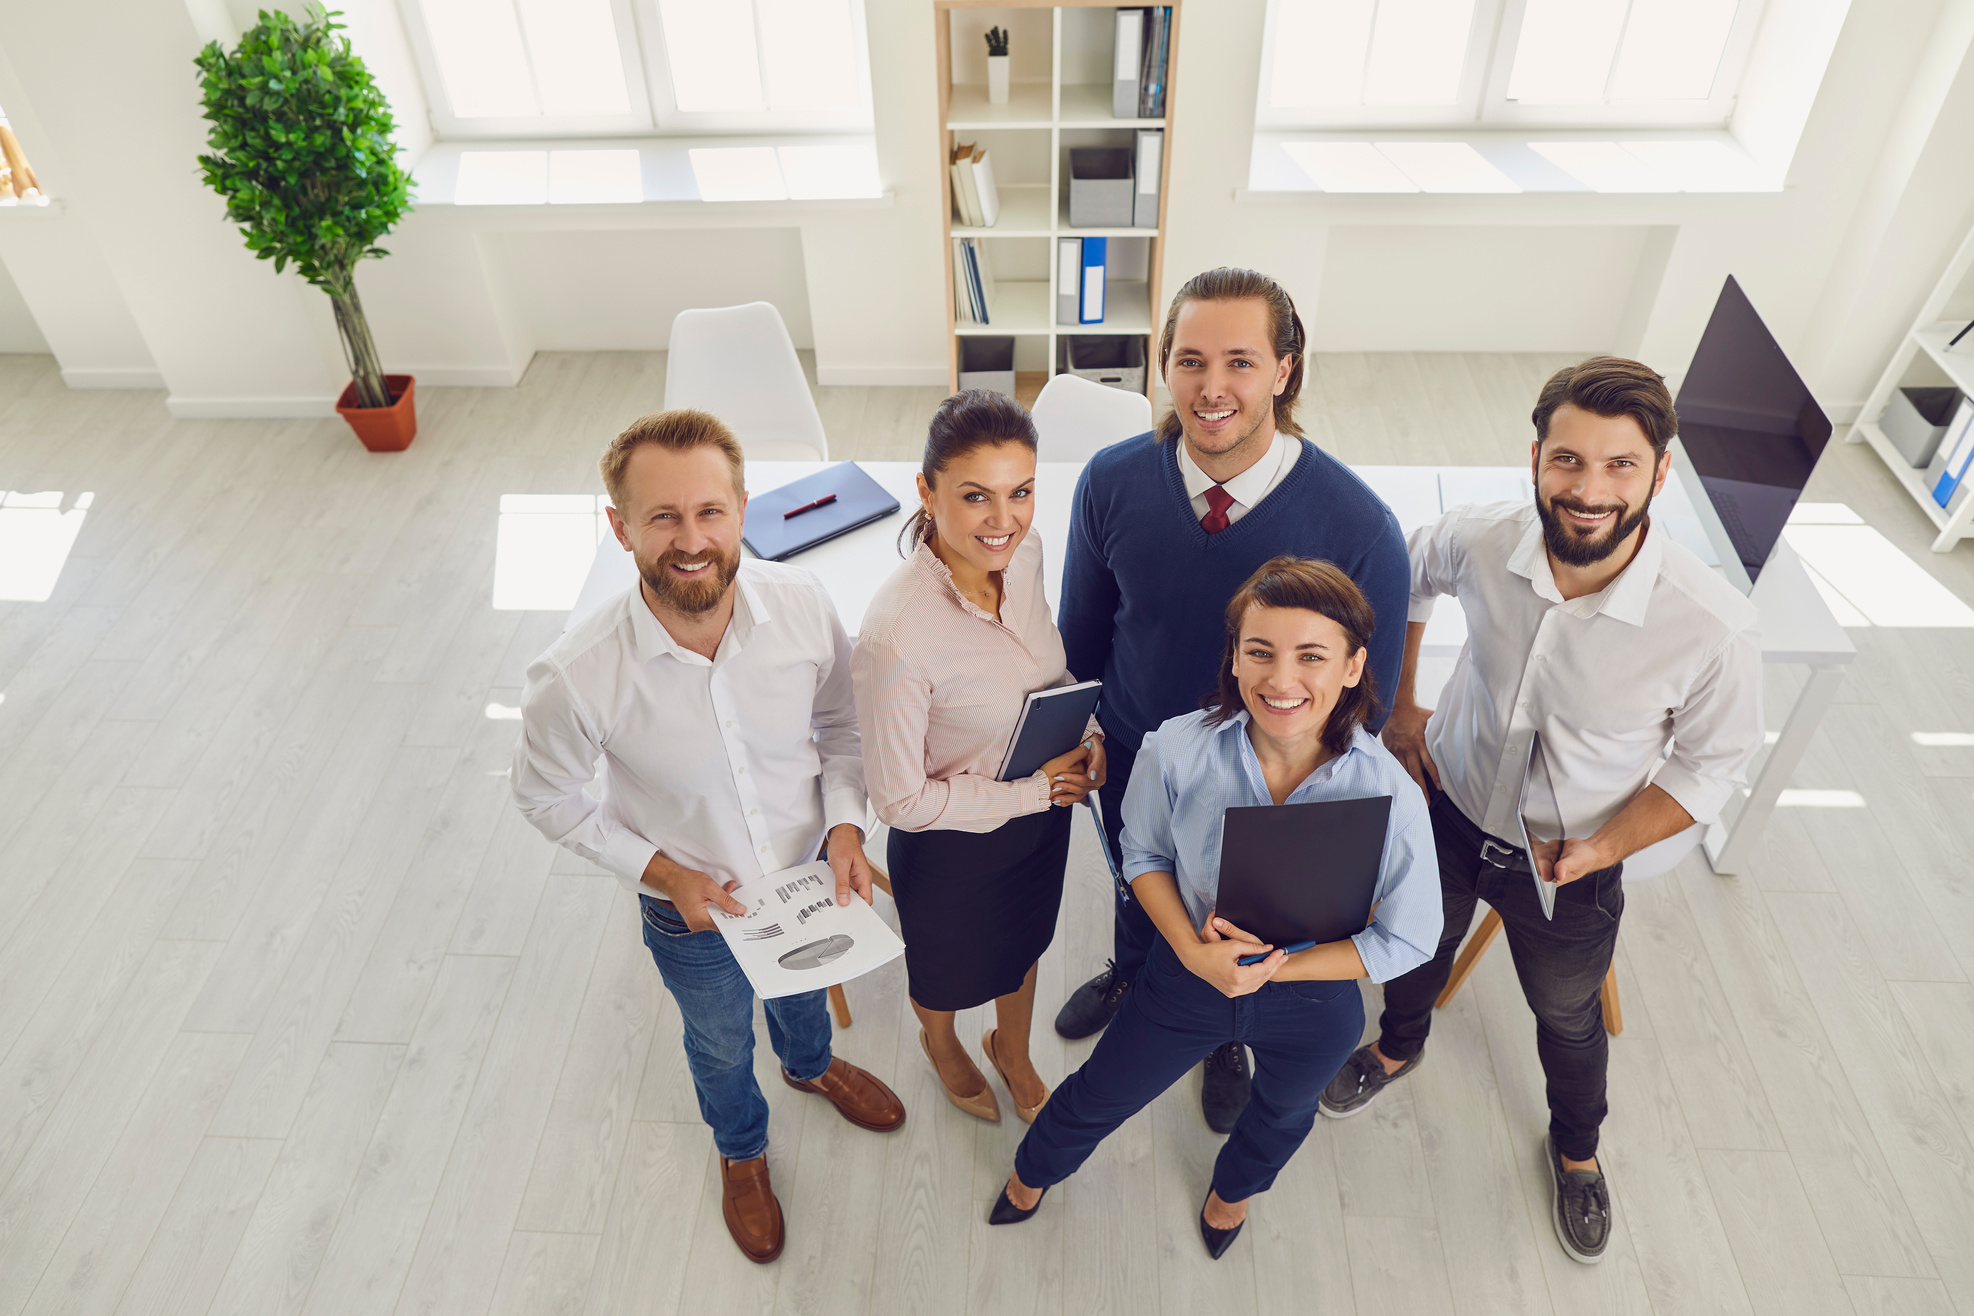 Satisfied Sales Department Employees Standing in Company Office Looking at Camera